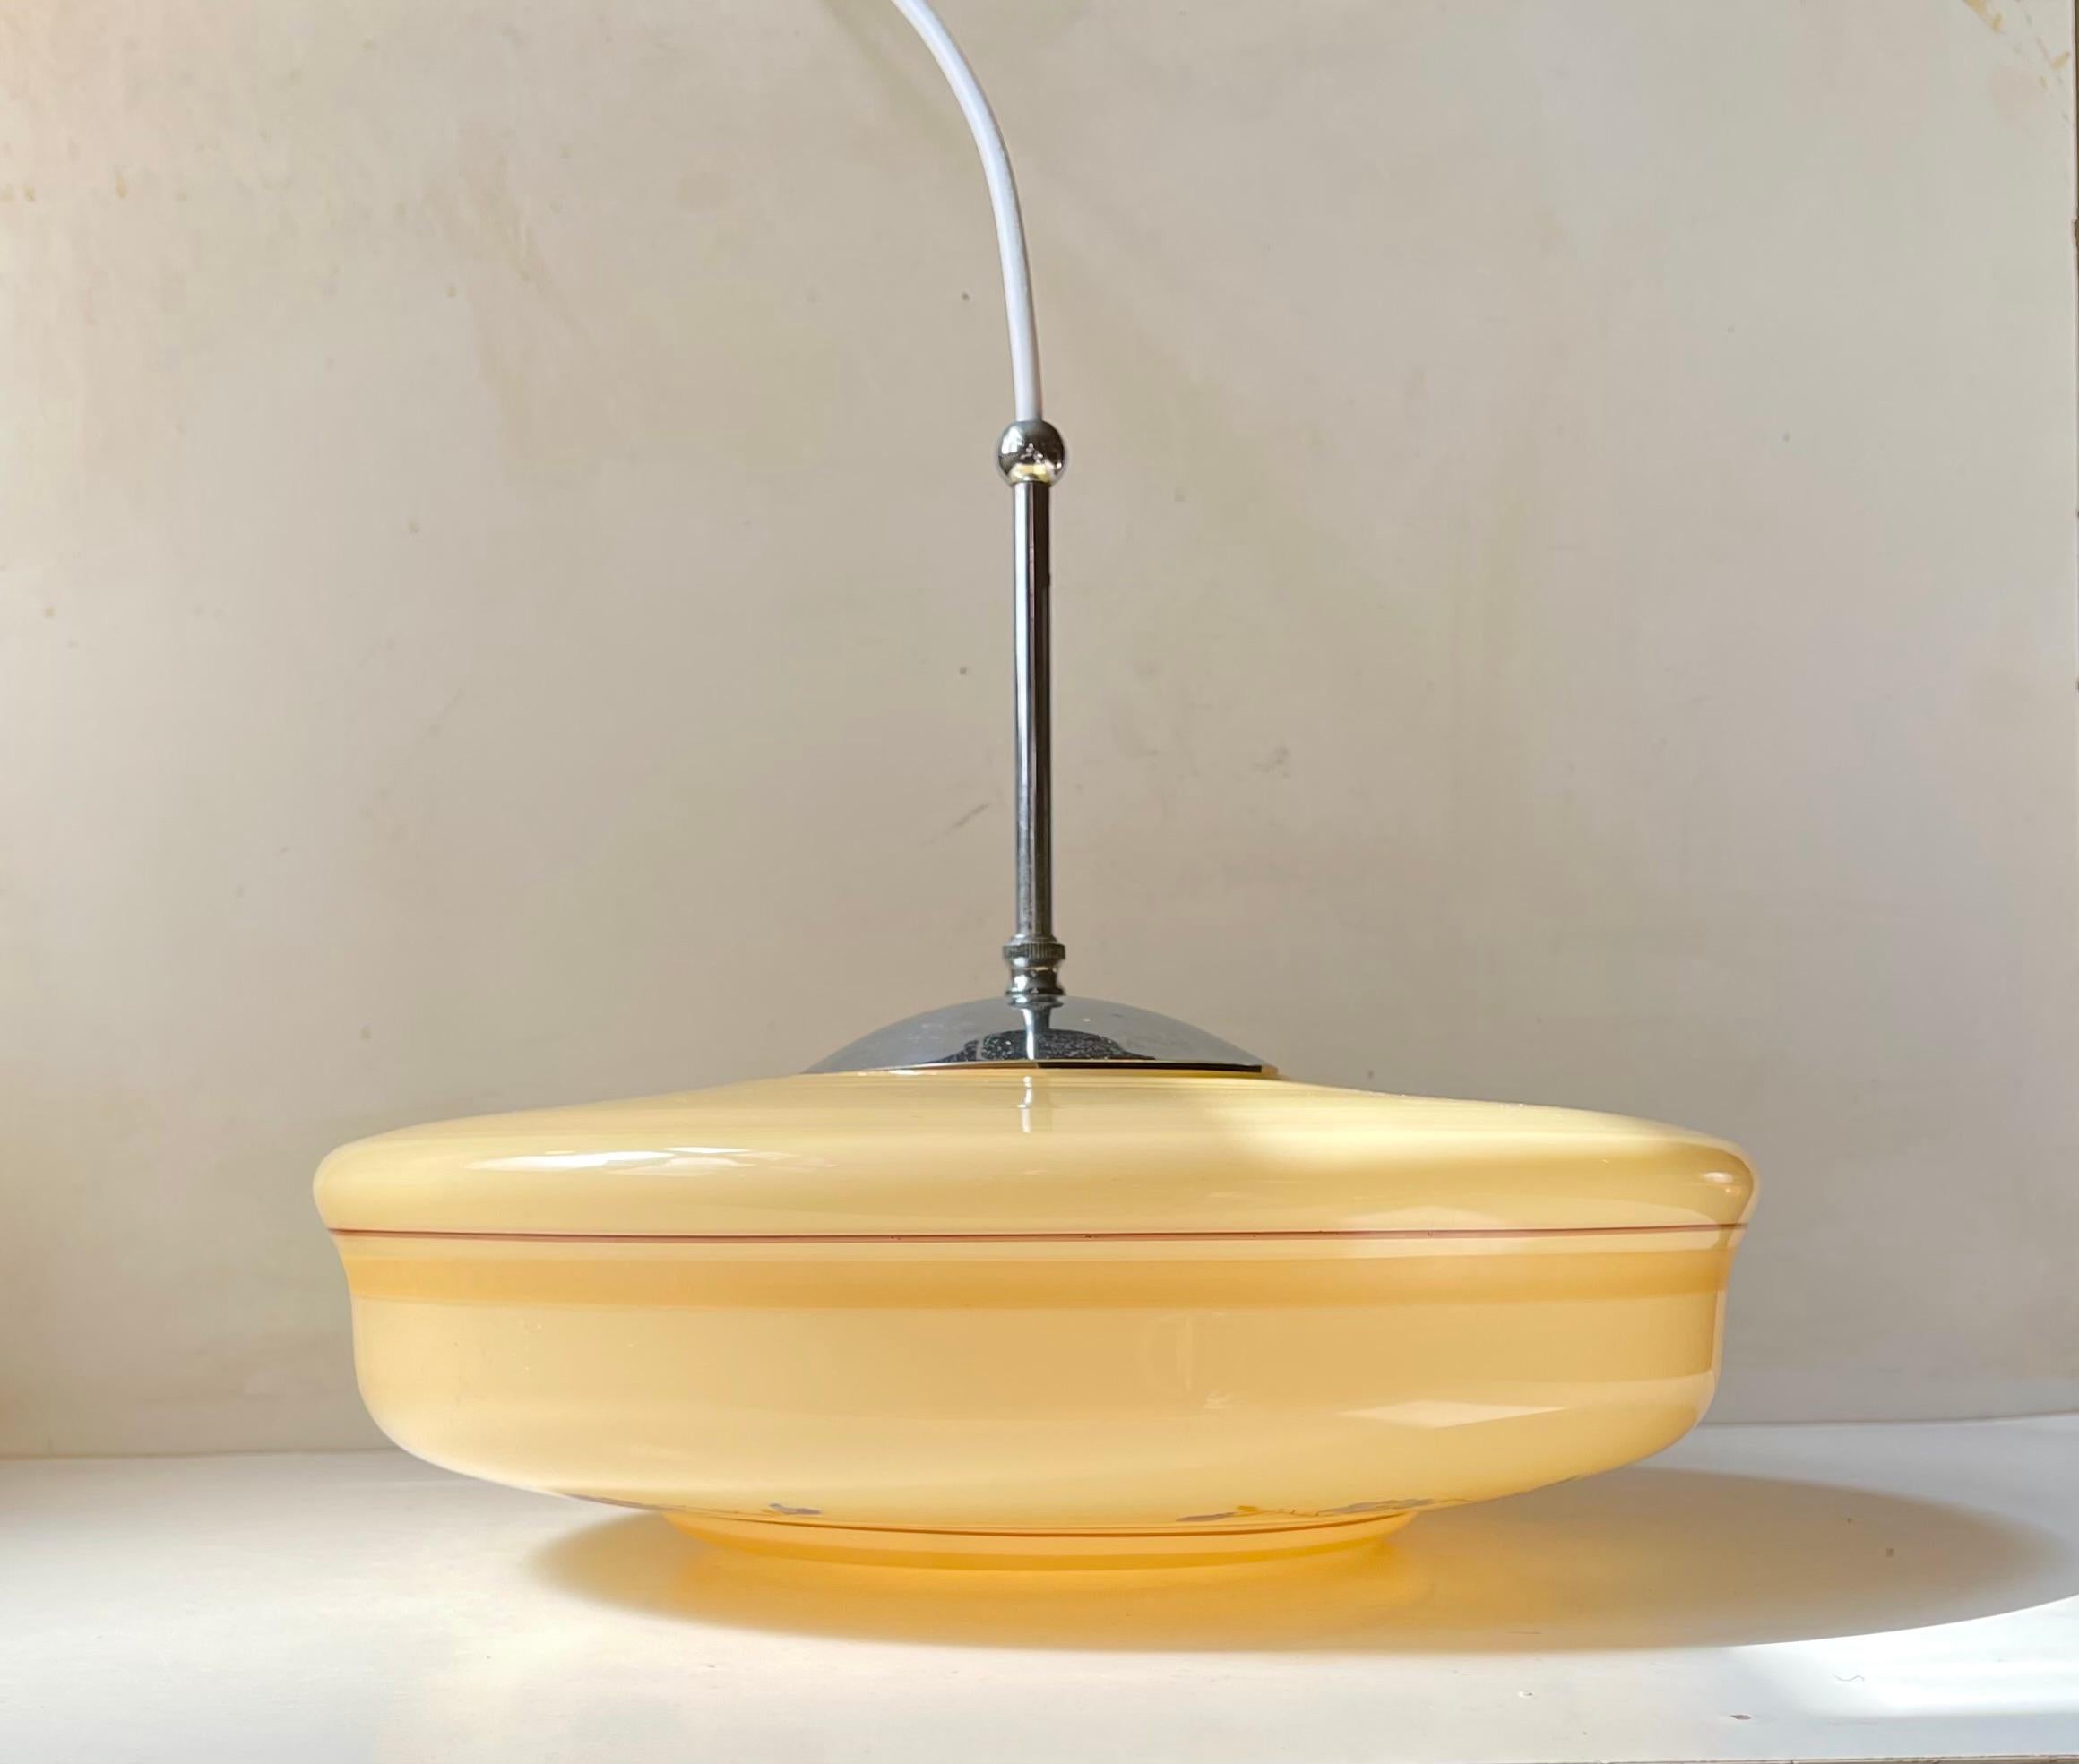 A large/wide saucer shaped ceiling lamp composed of yellow toned opaline glass and nickel plated top and original canopy. It was made in Denmark during the 1940s in a style reminiscent of Bauhaus and Art Deco lighting. Please notice it has 5